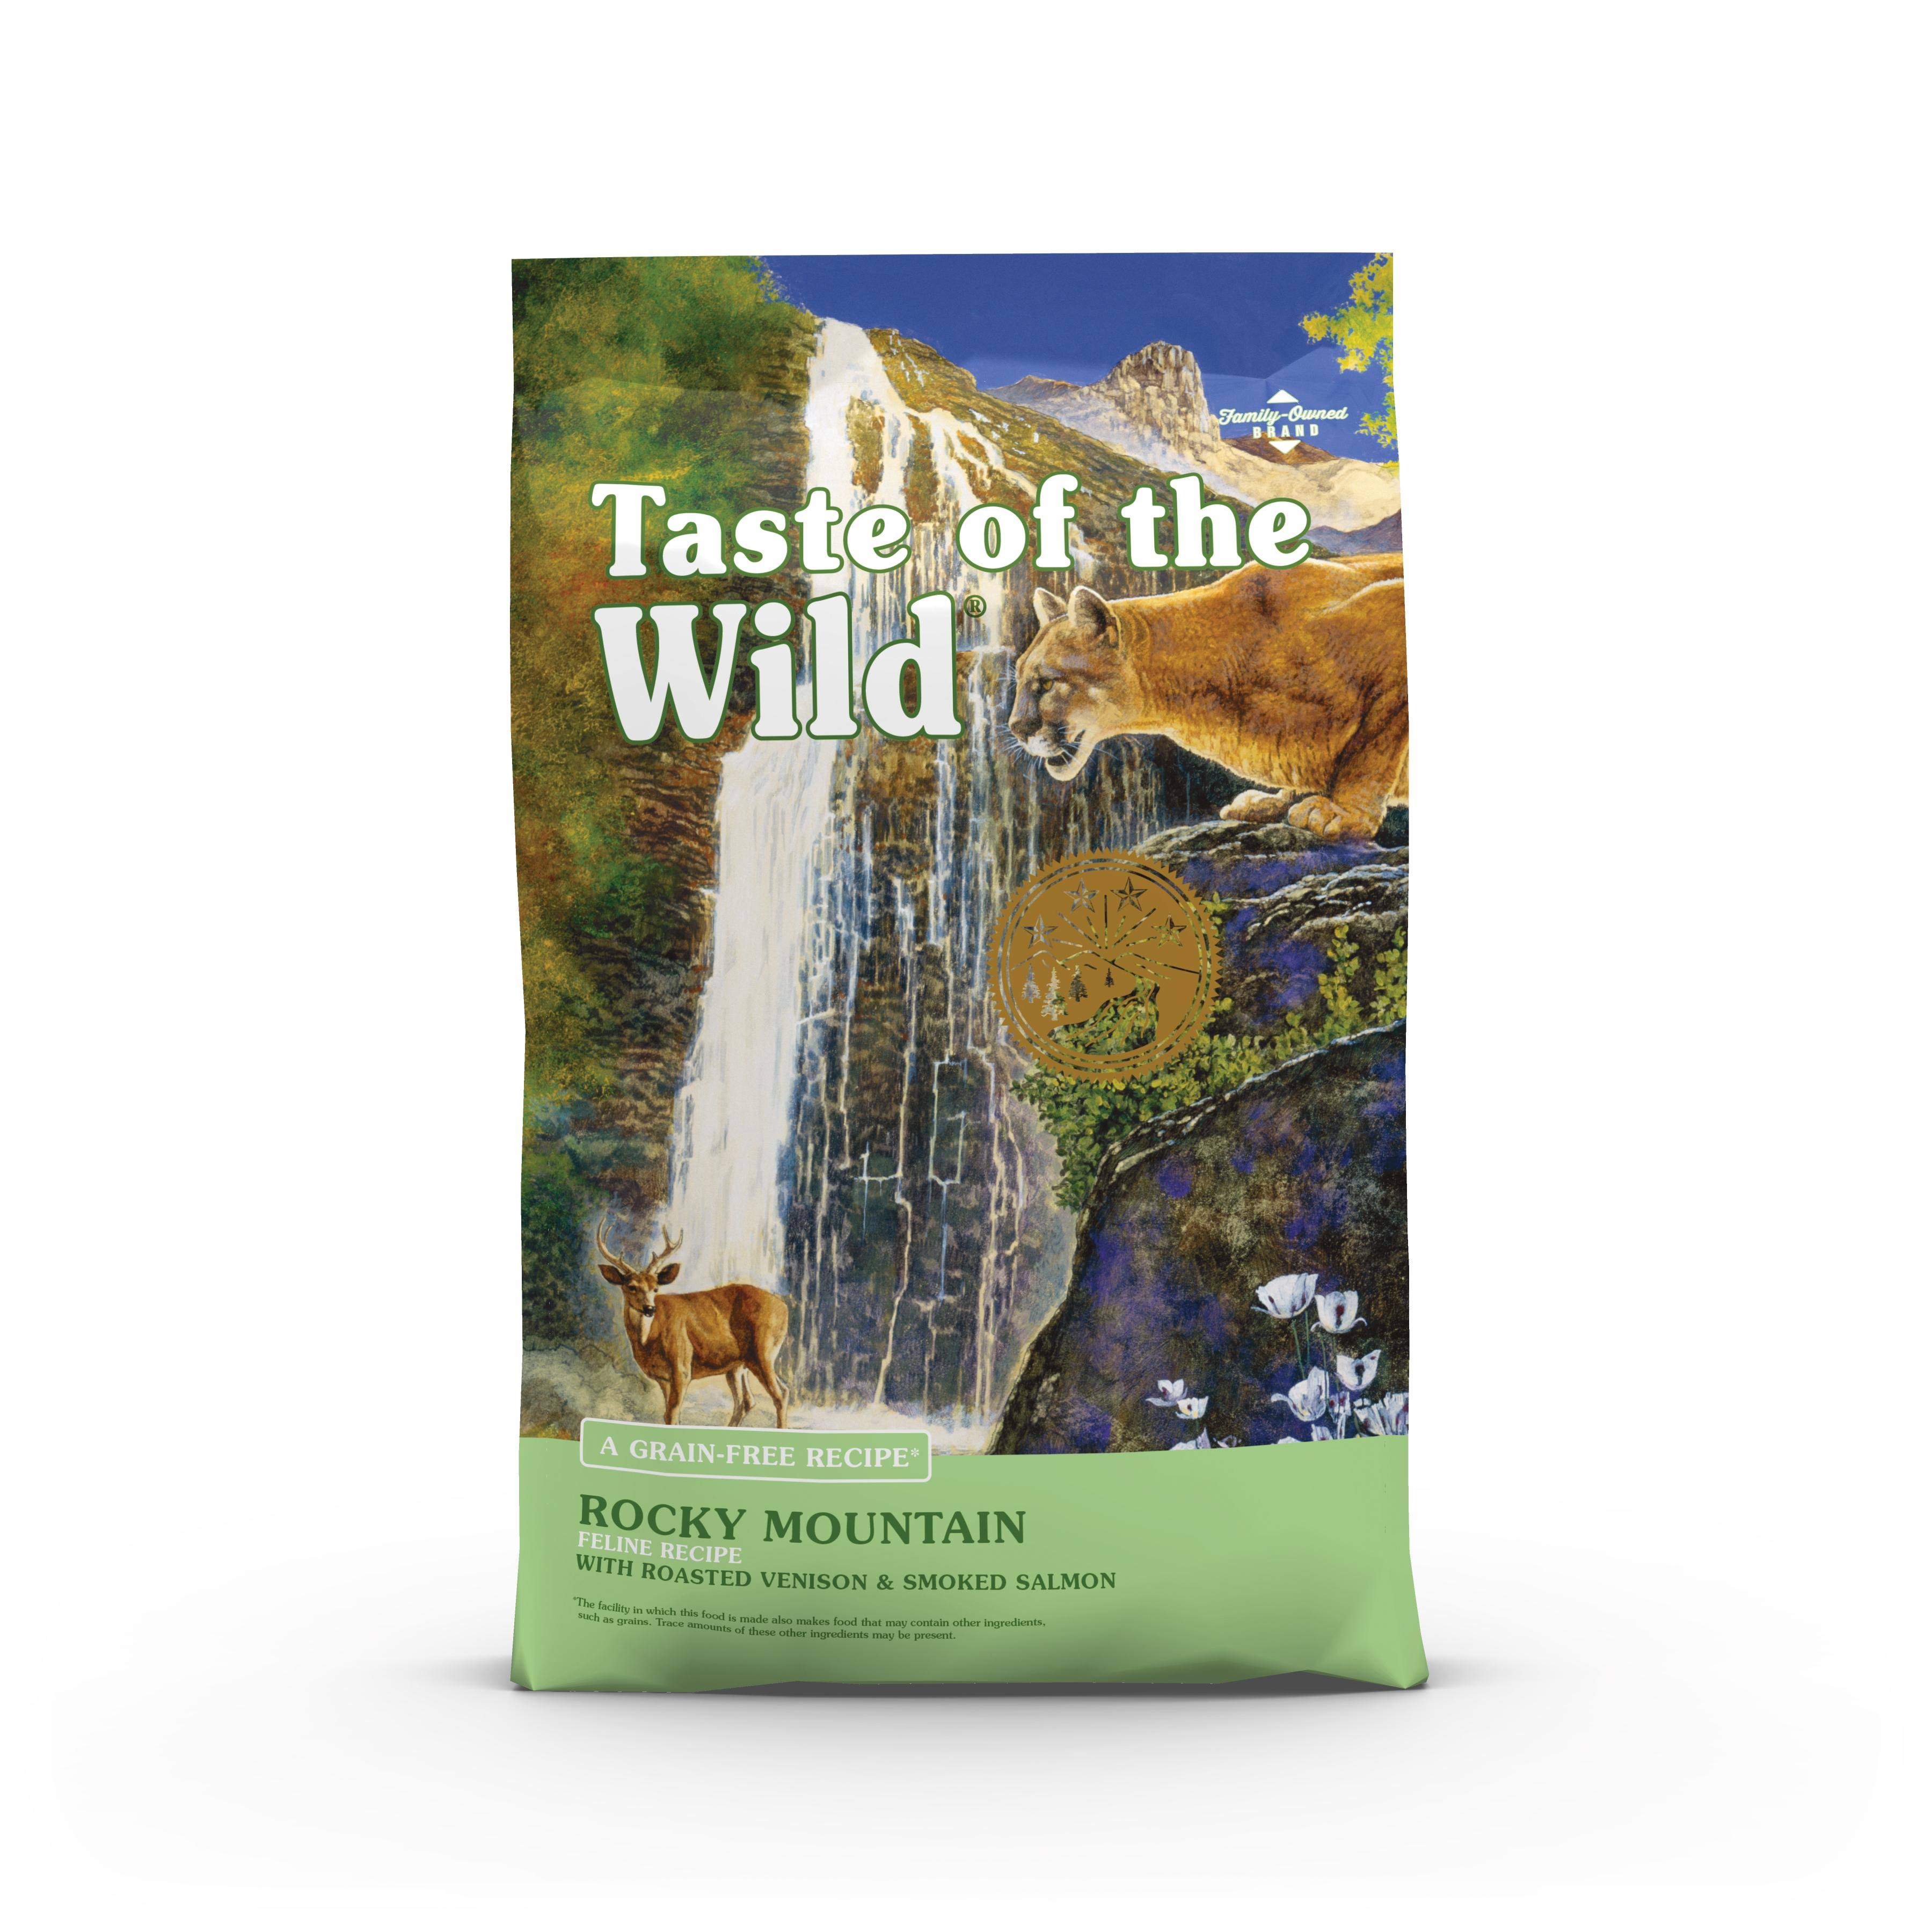 Taste of the Wild Rocky Mountain with Roasted Venison & Smoked Salmon Cat Food 14lbs